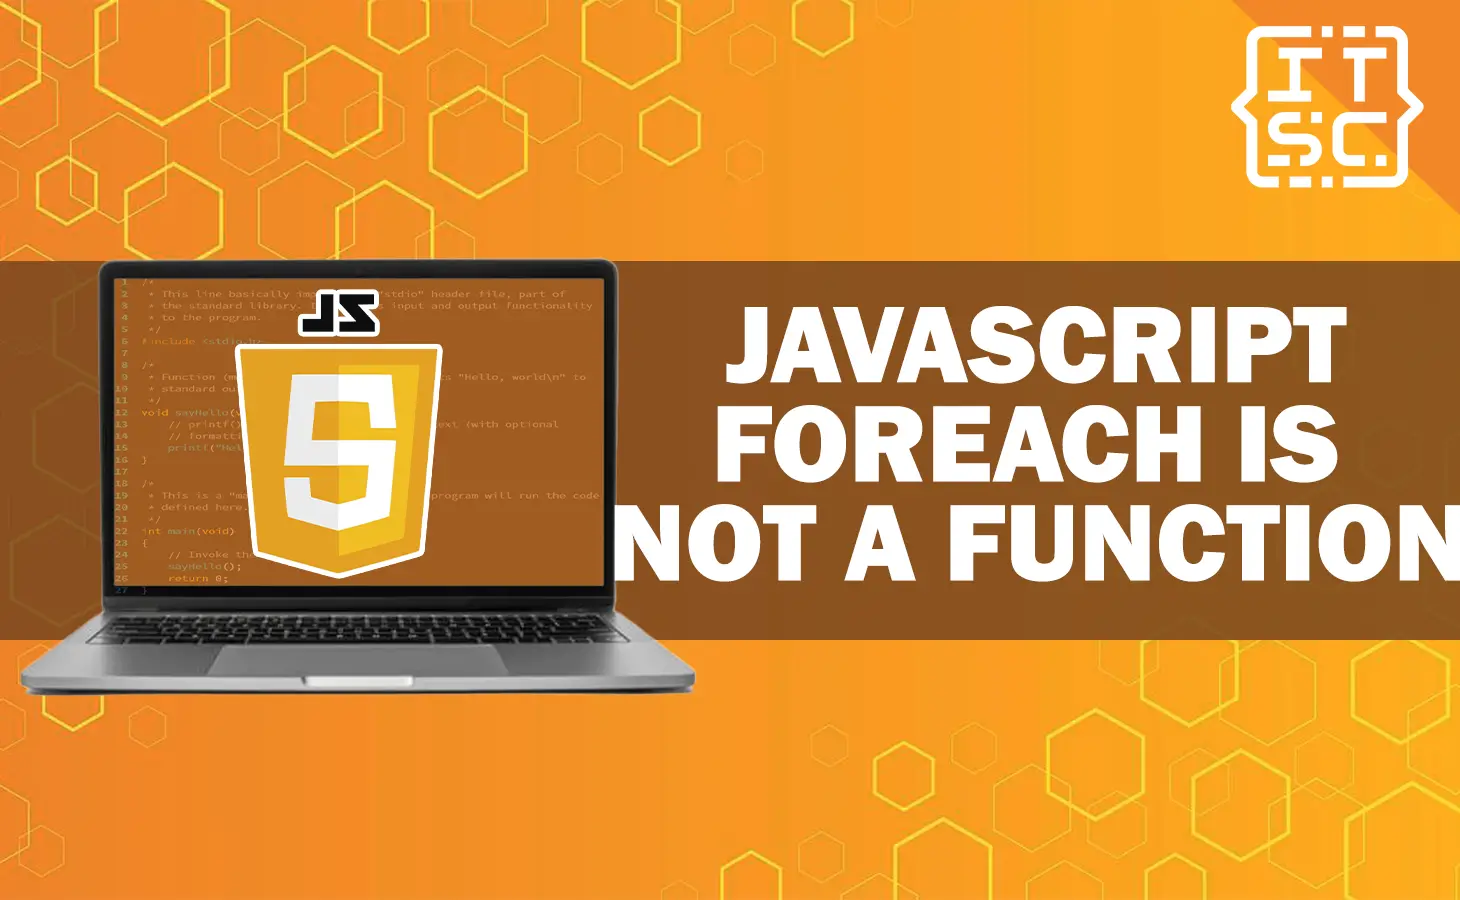 JavaScript Foreach is Not a Function